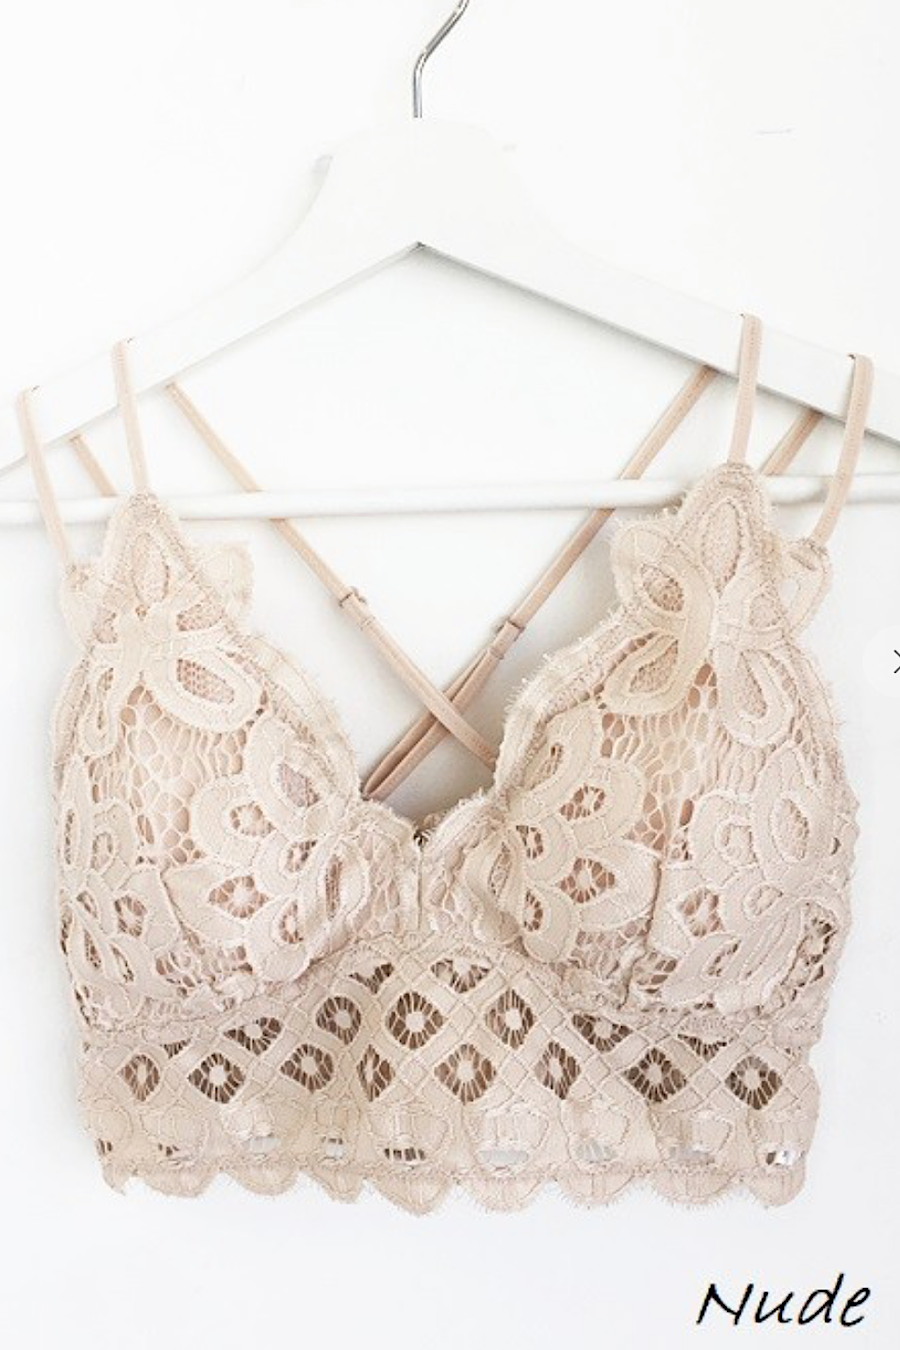 Plus Size Lace Bralette in Black, Sandstone, Light Taupe or Nude